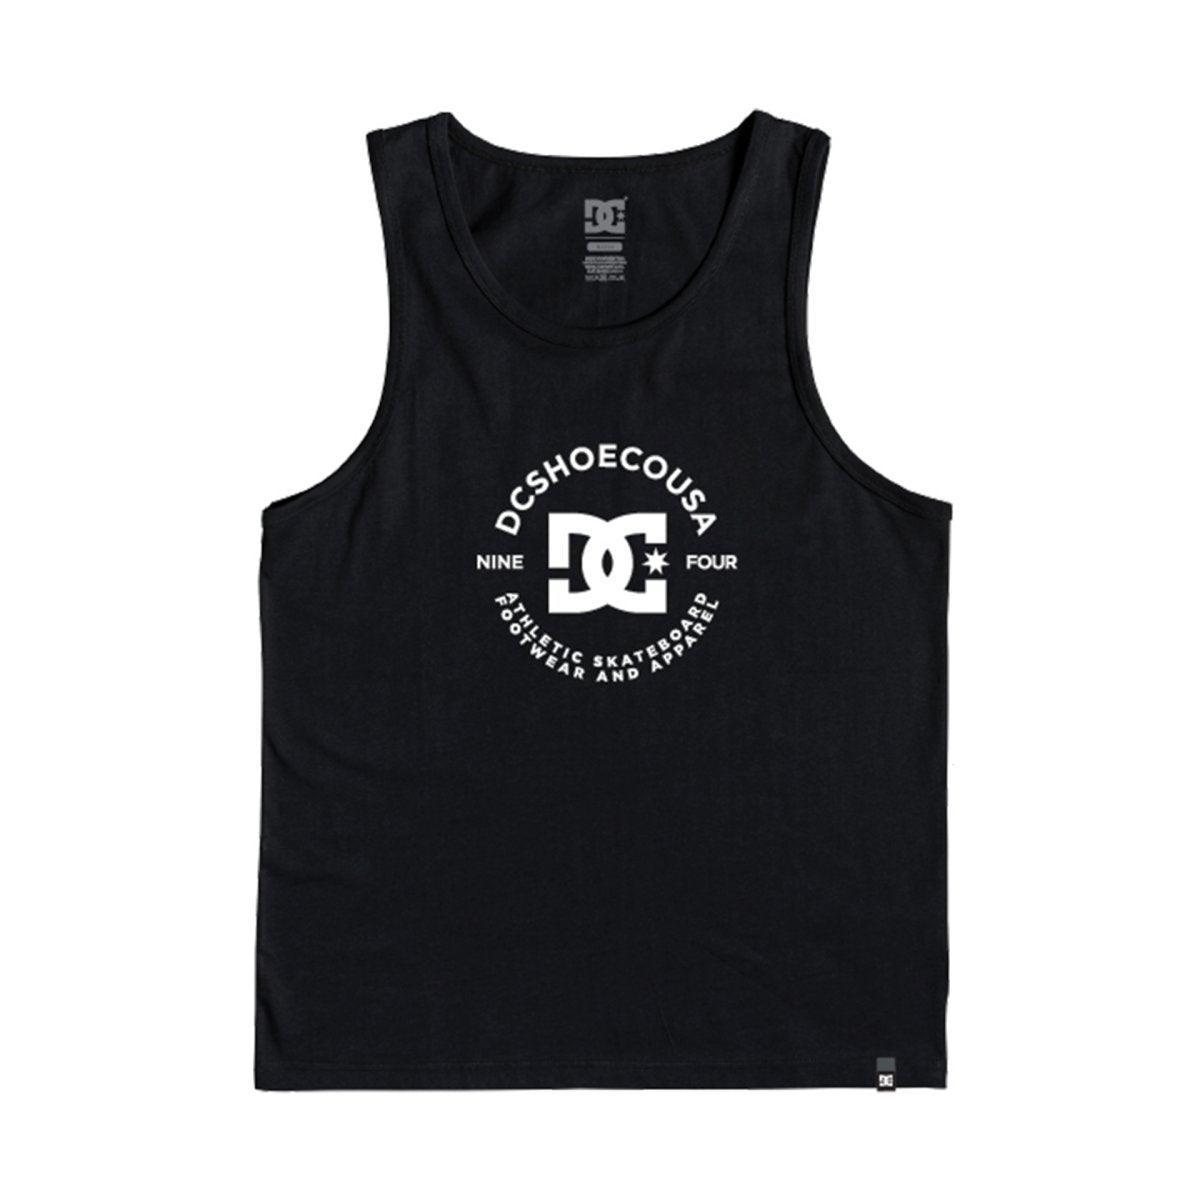 Musculosa Dc Star Pilot Negro - Indy